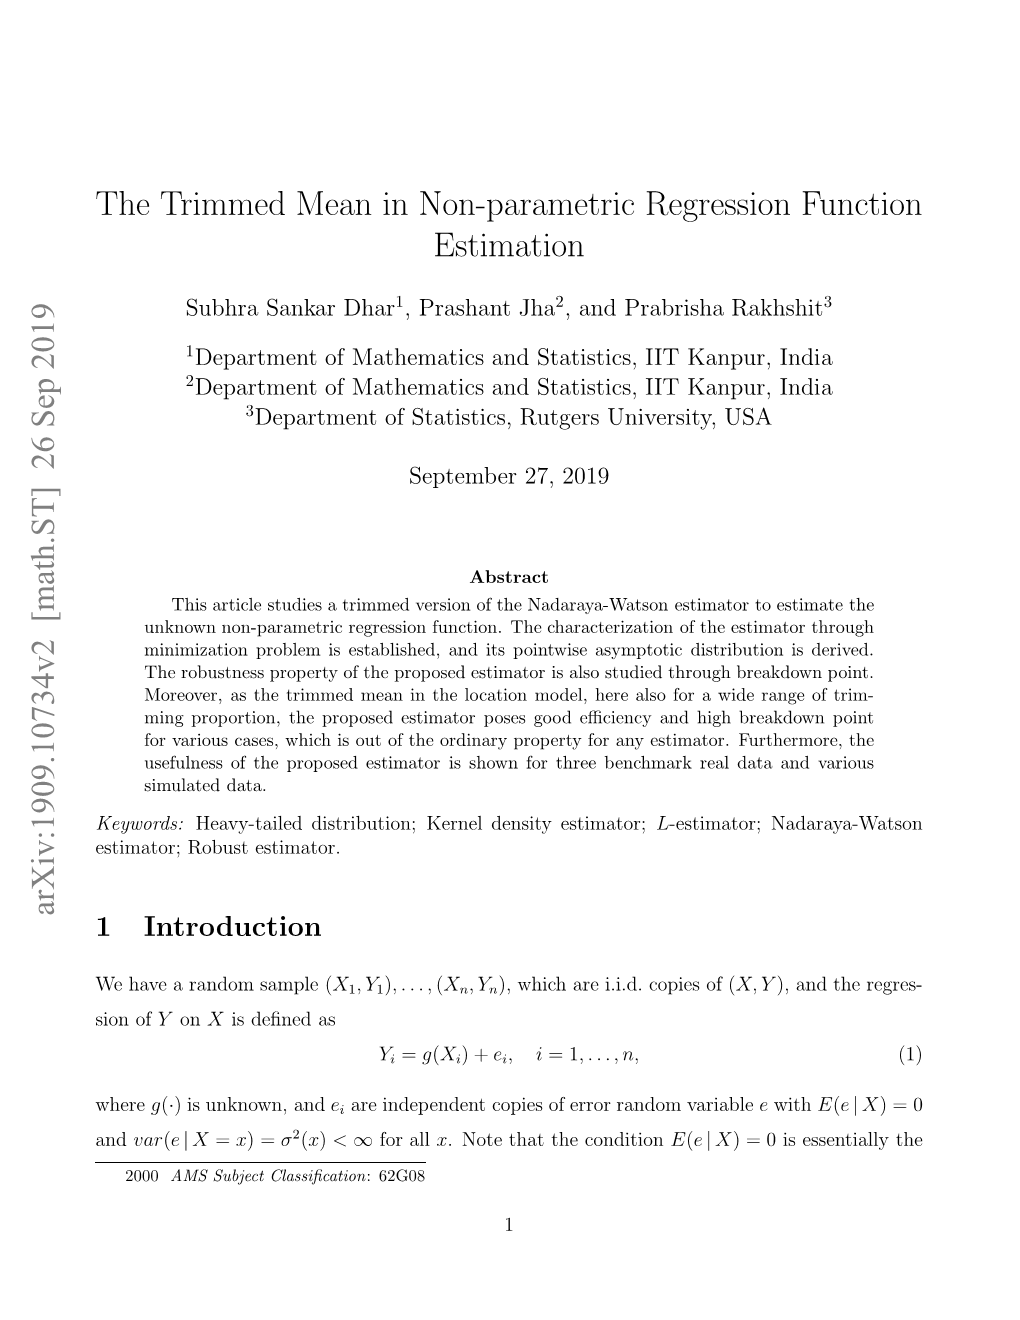 26 Sep 2019 the Trimmed Mean in Non-Parametric Regression